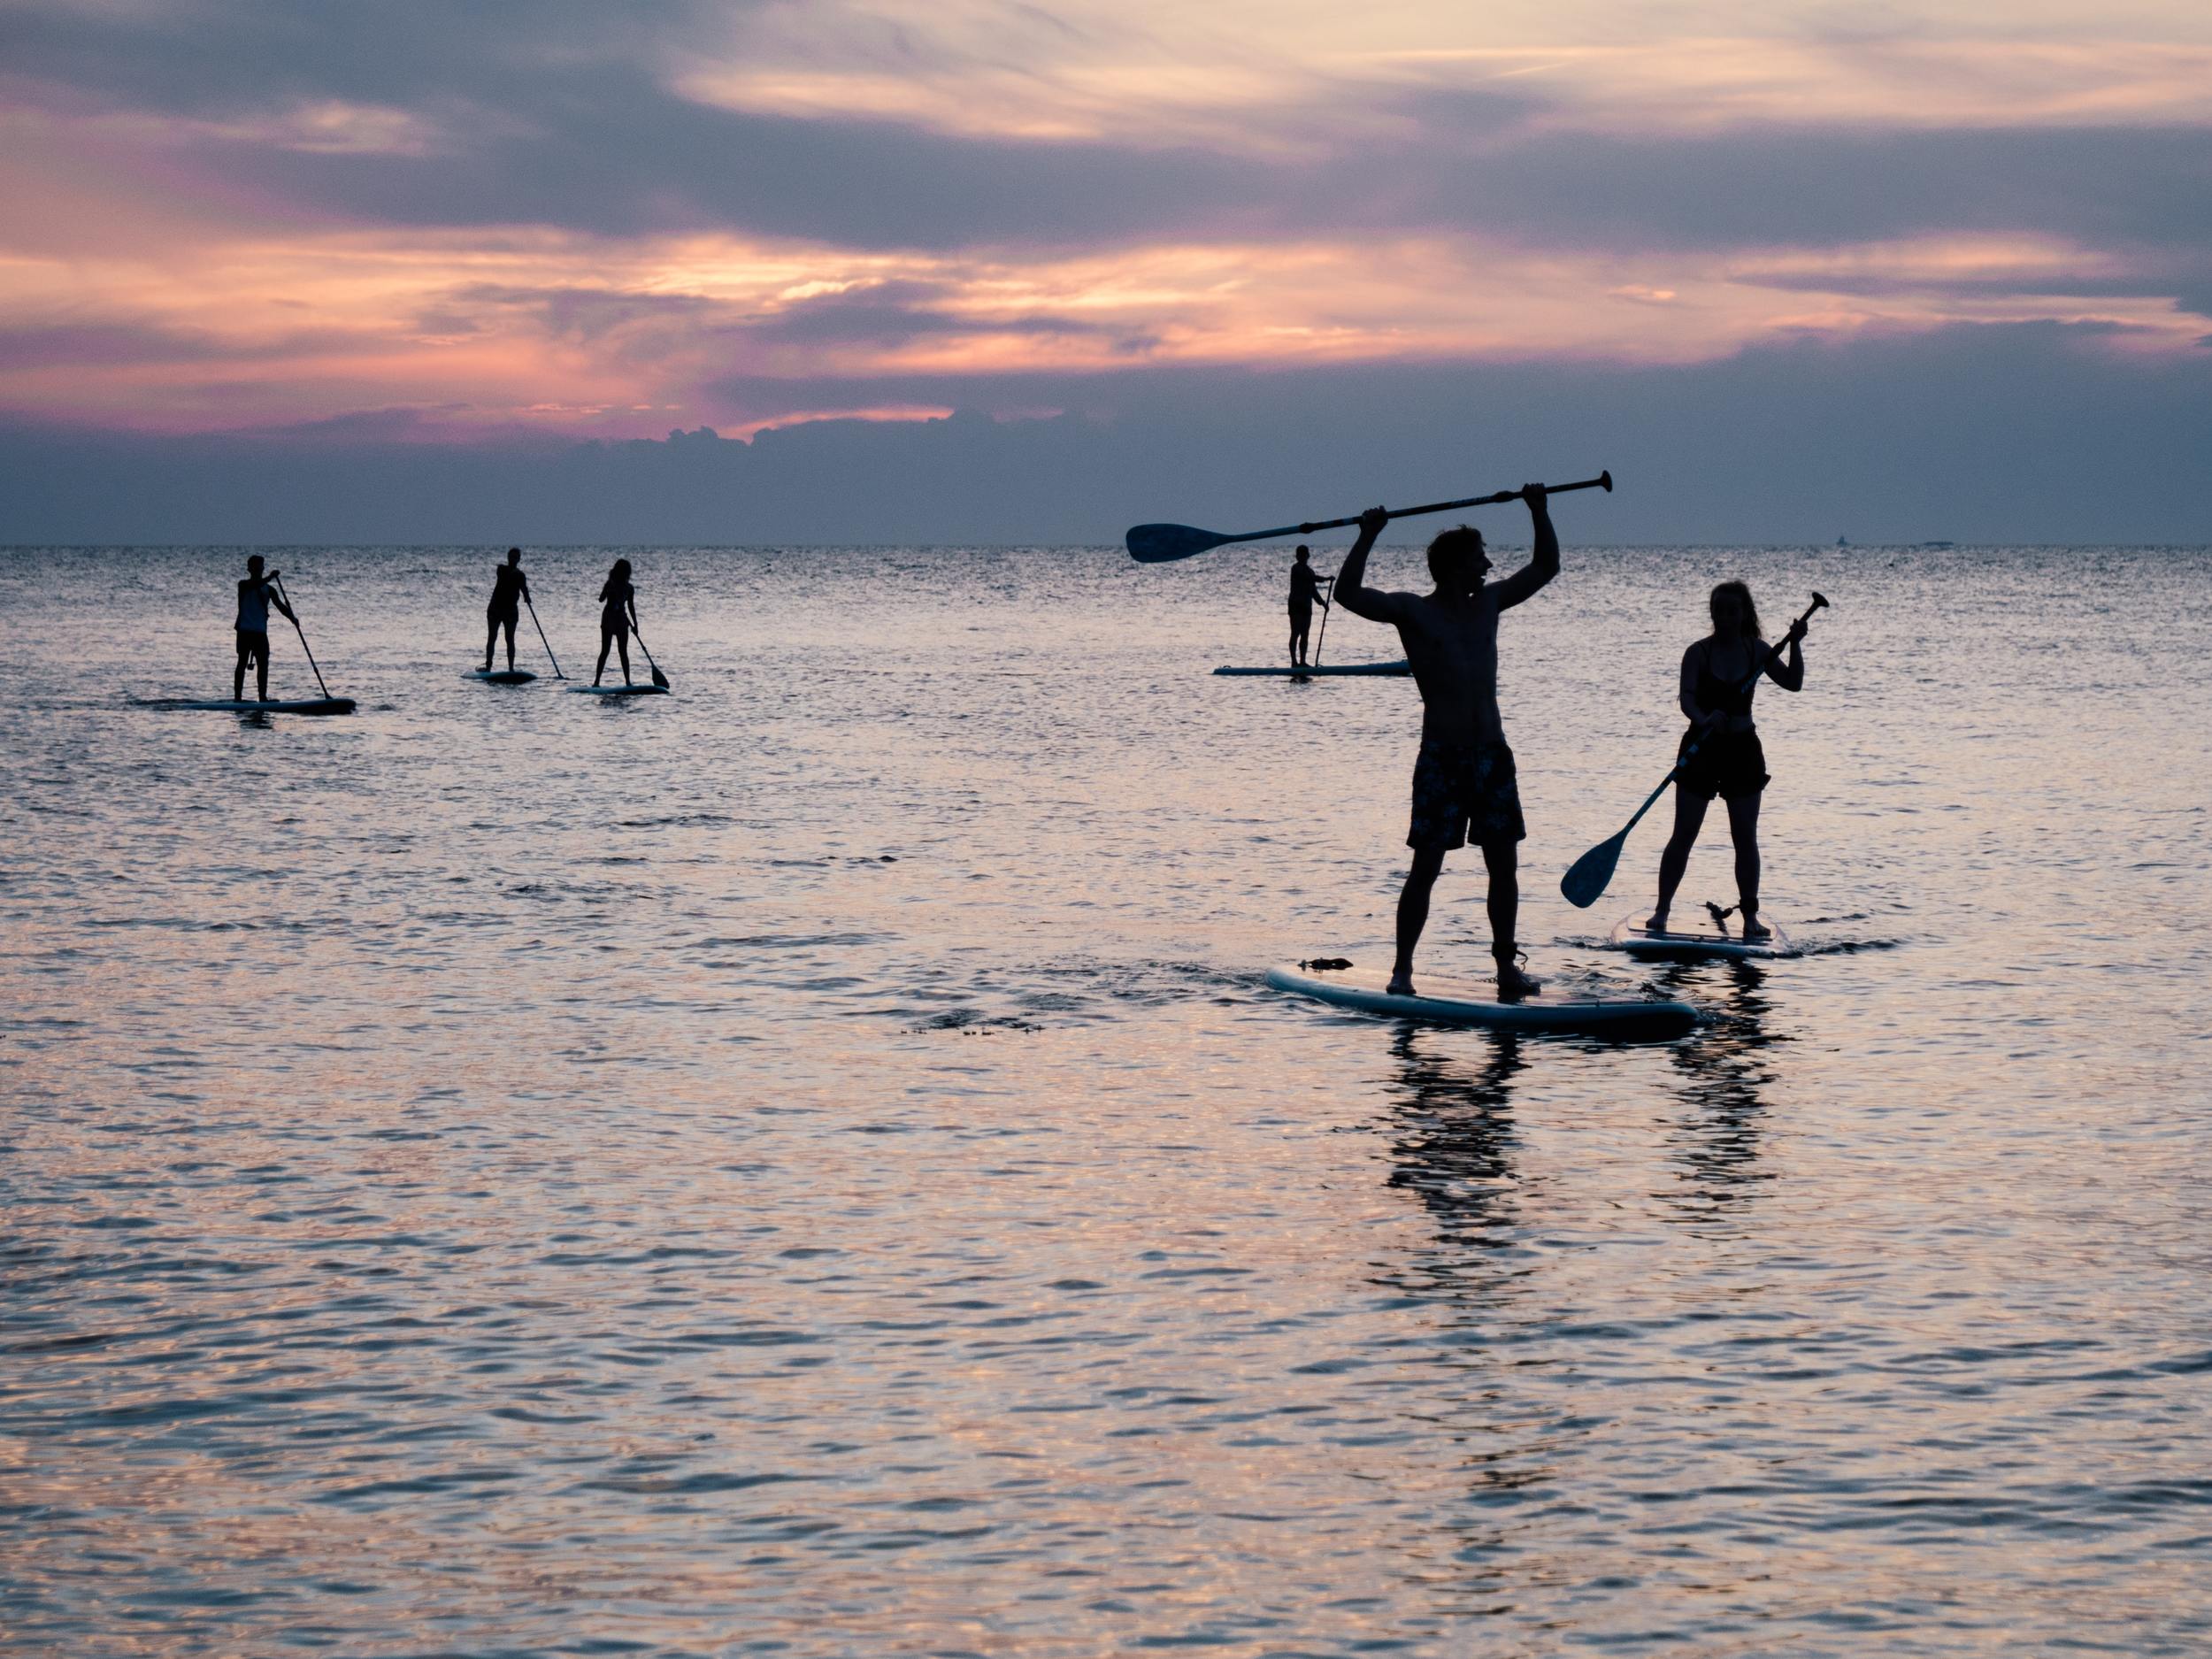 How to Choose the Best SUP Board Guide in Buying SUP Board